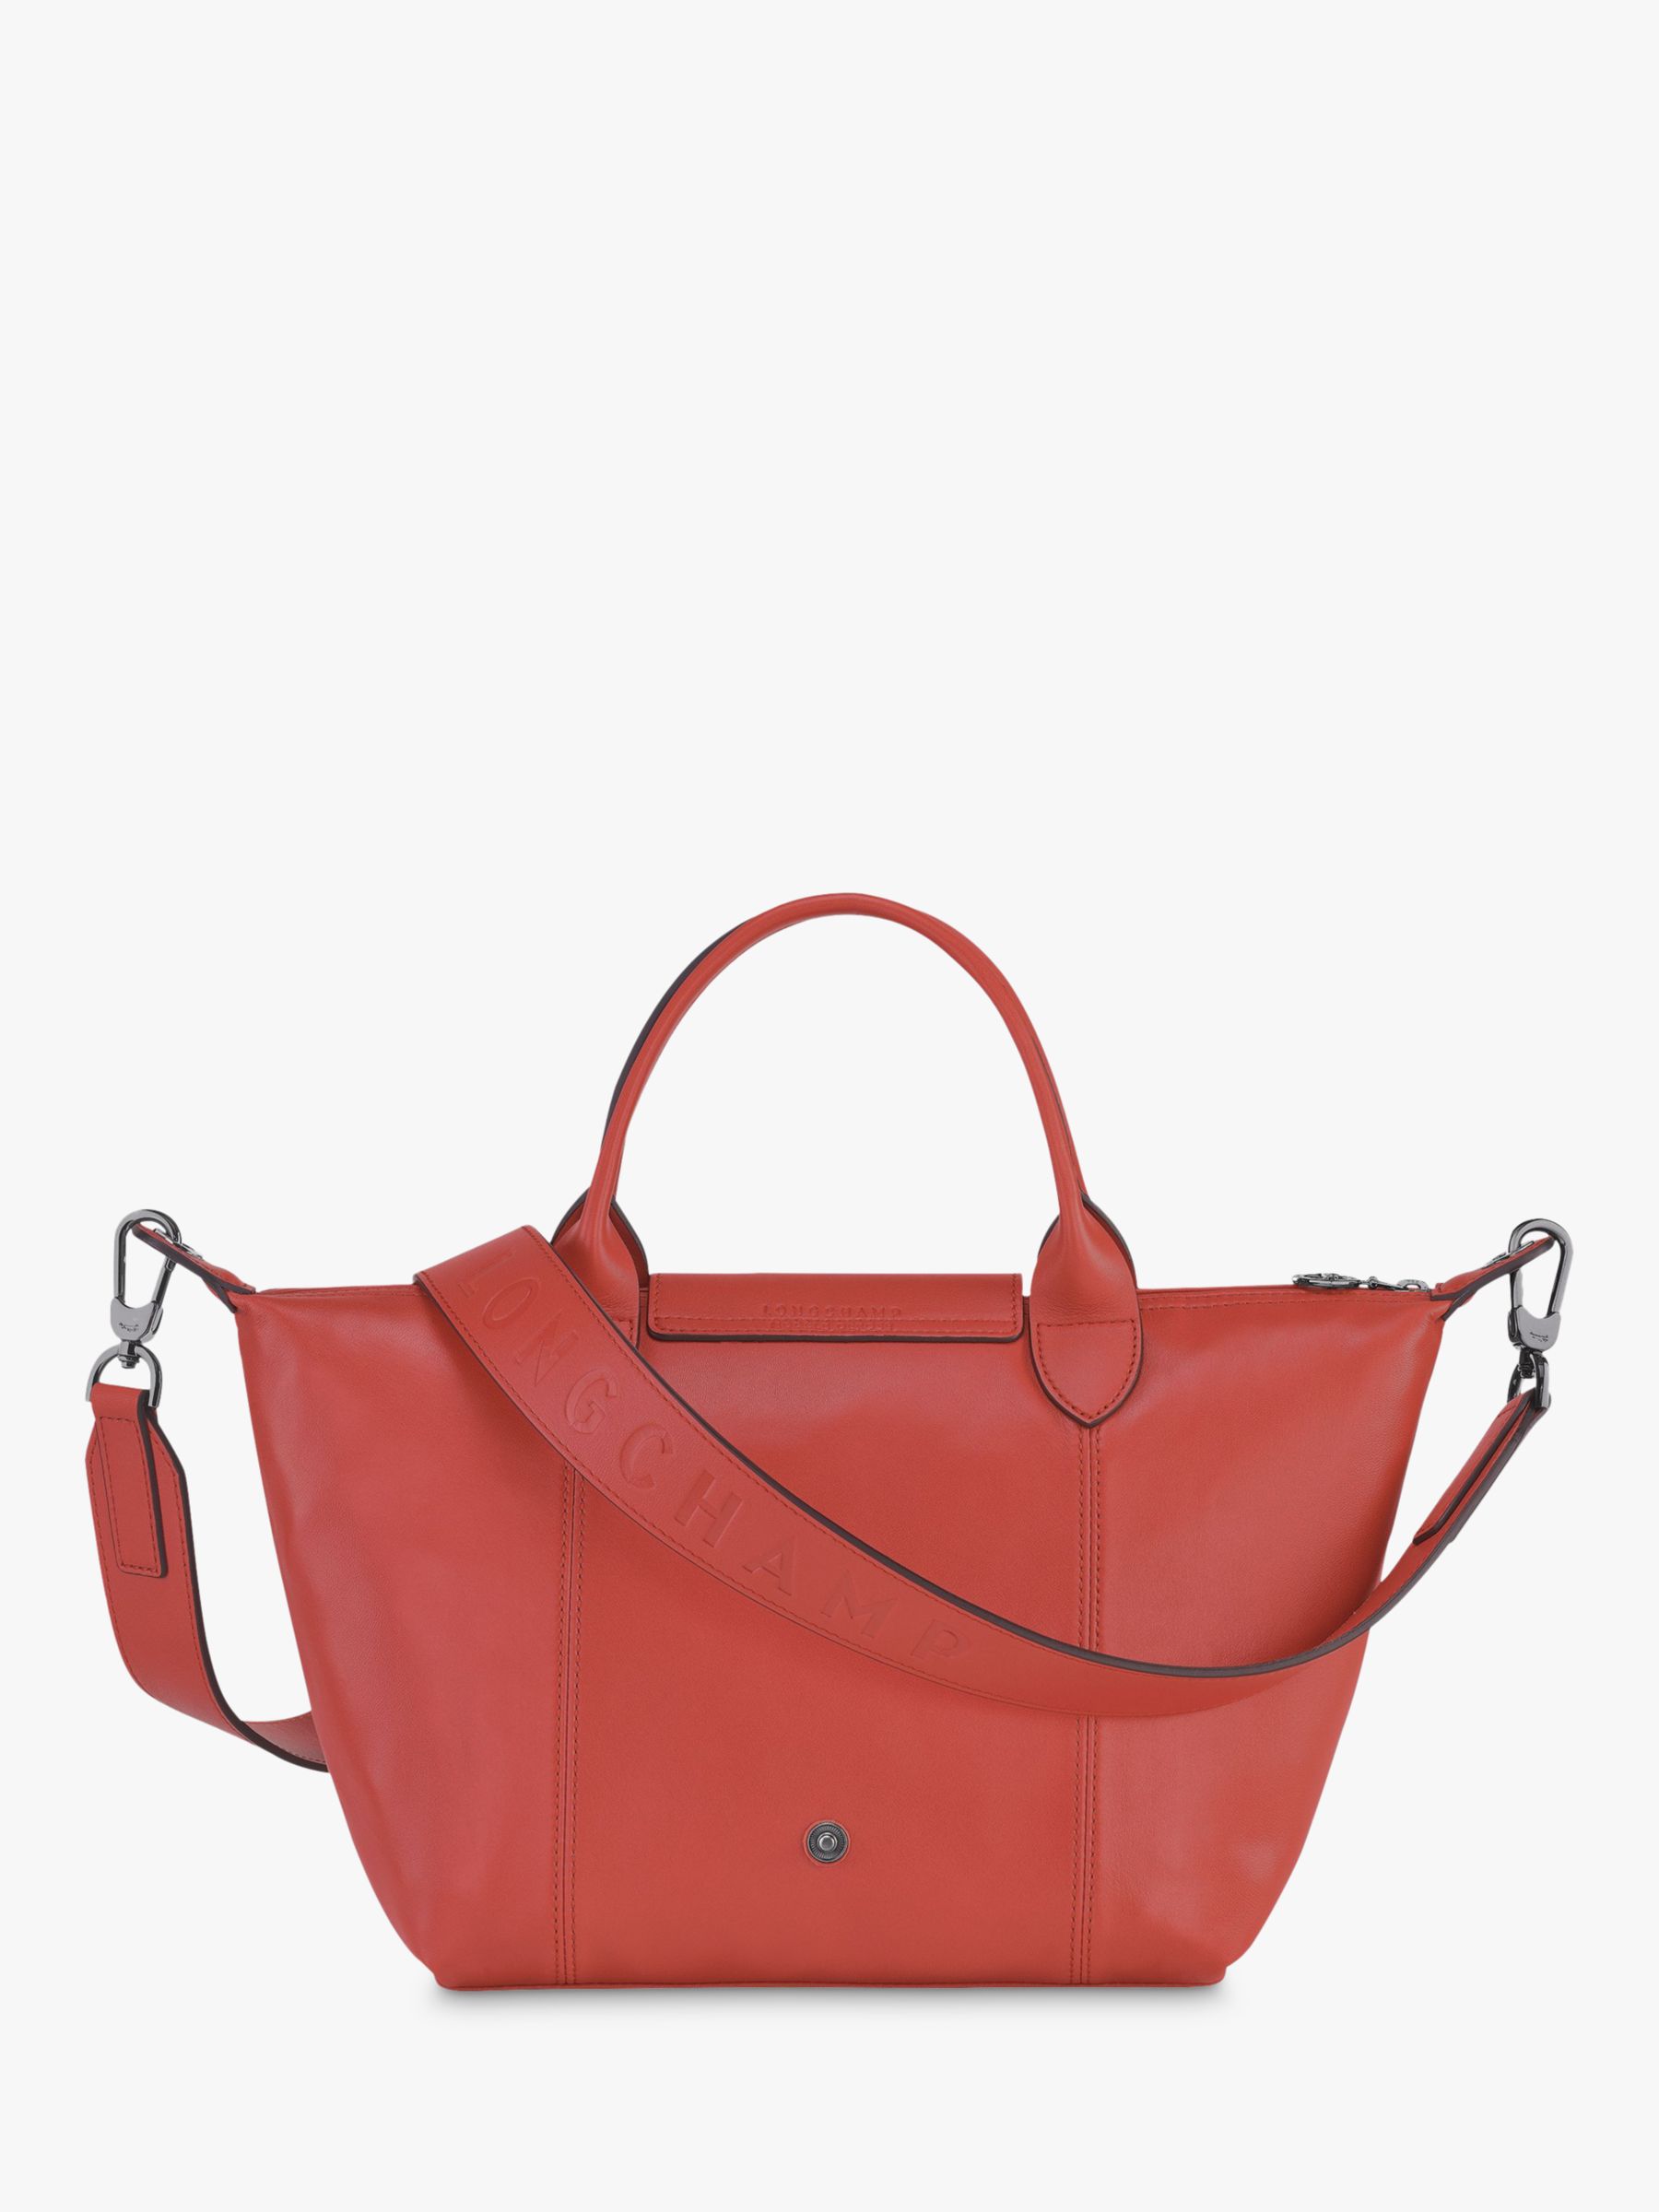 Longchamp Le Pliage Cuir Leather Backpack